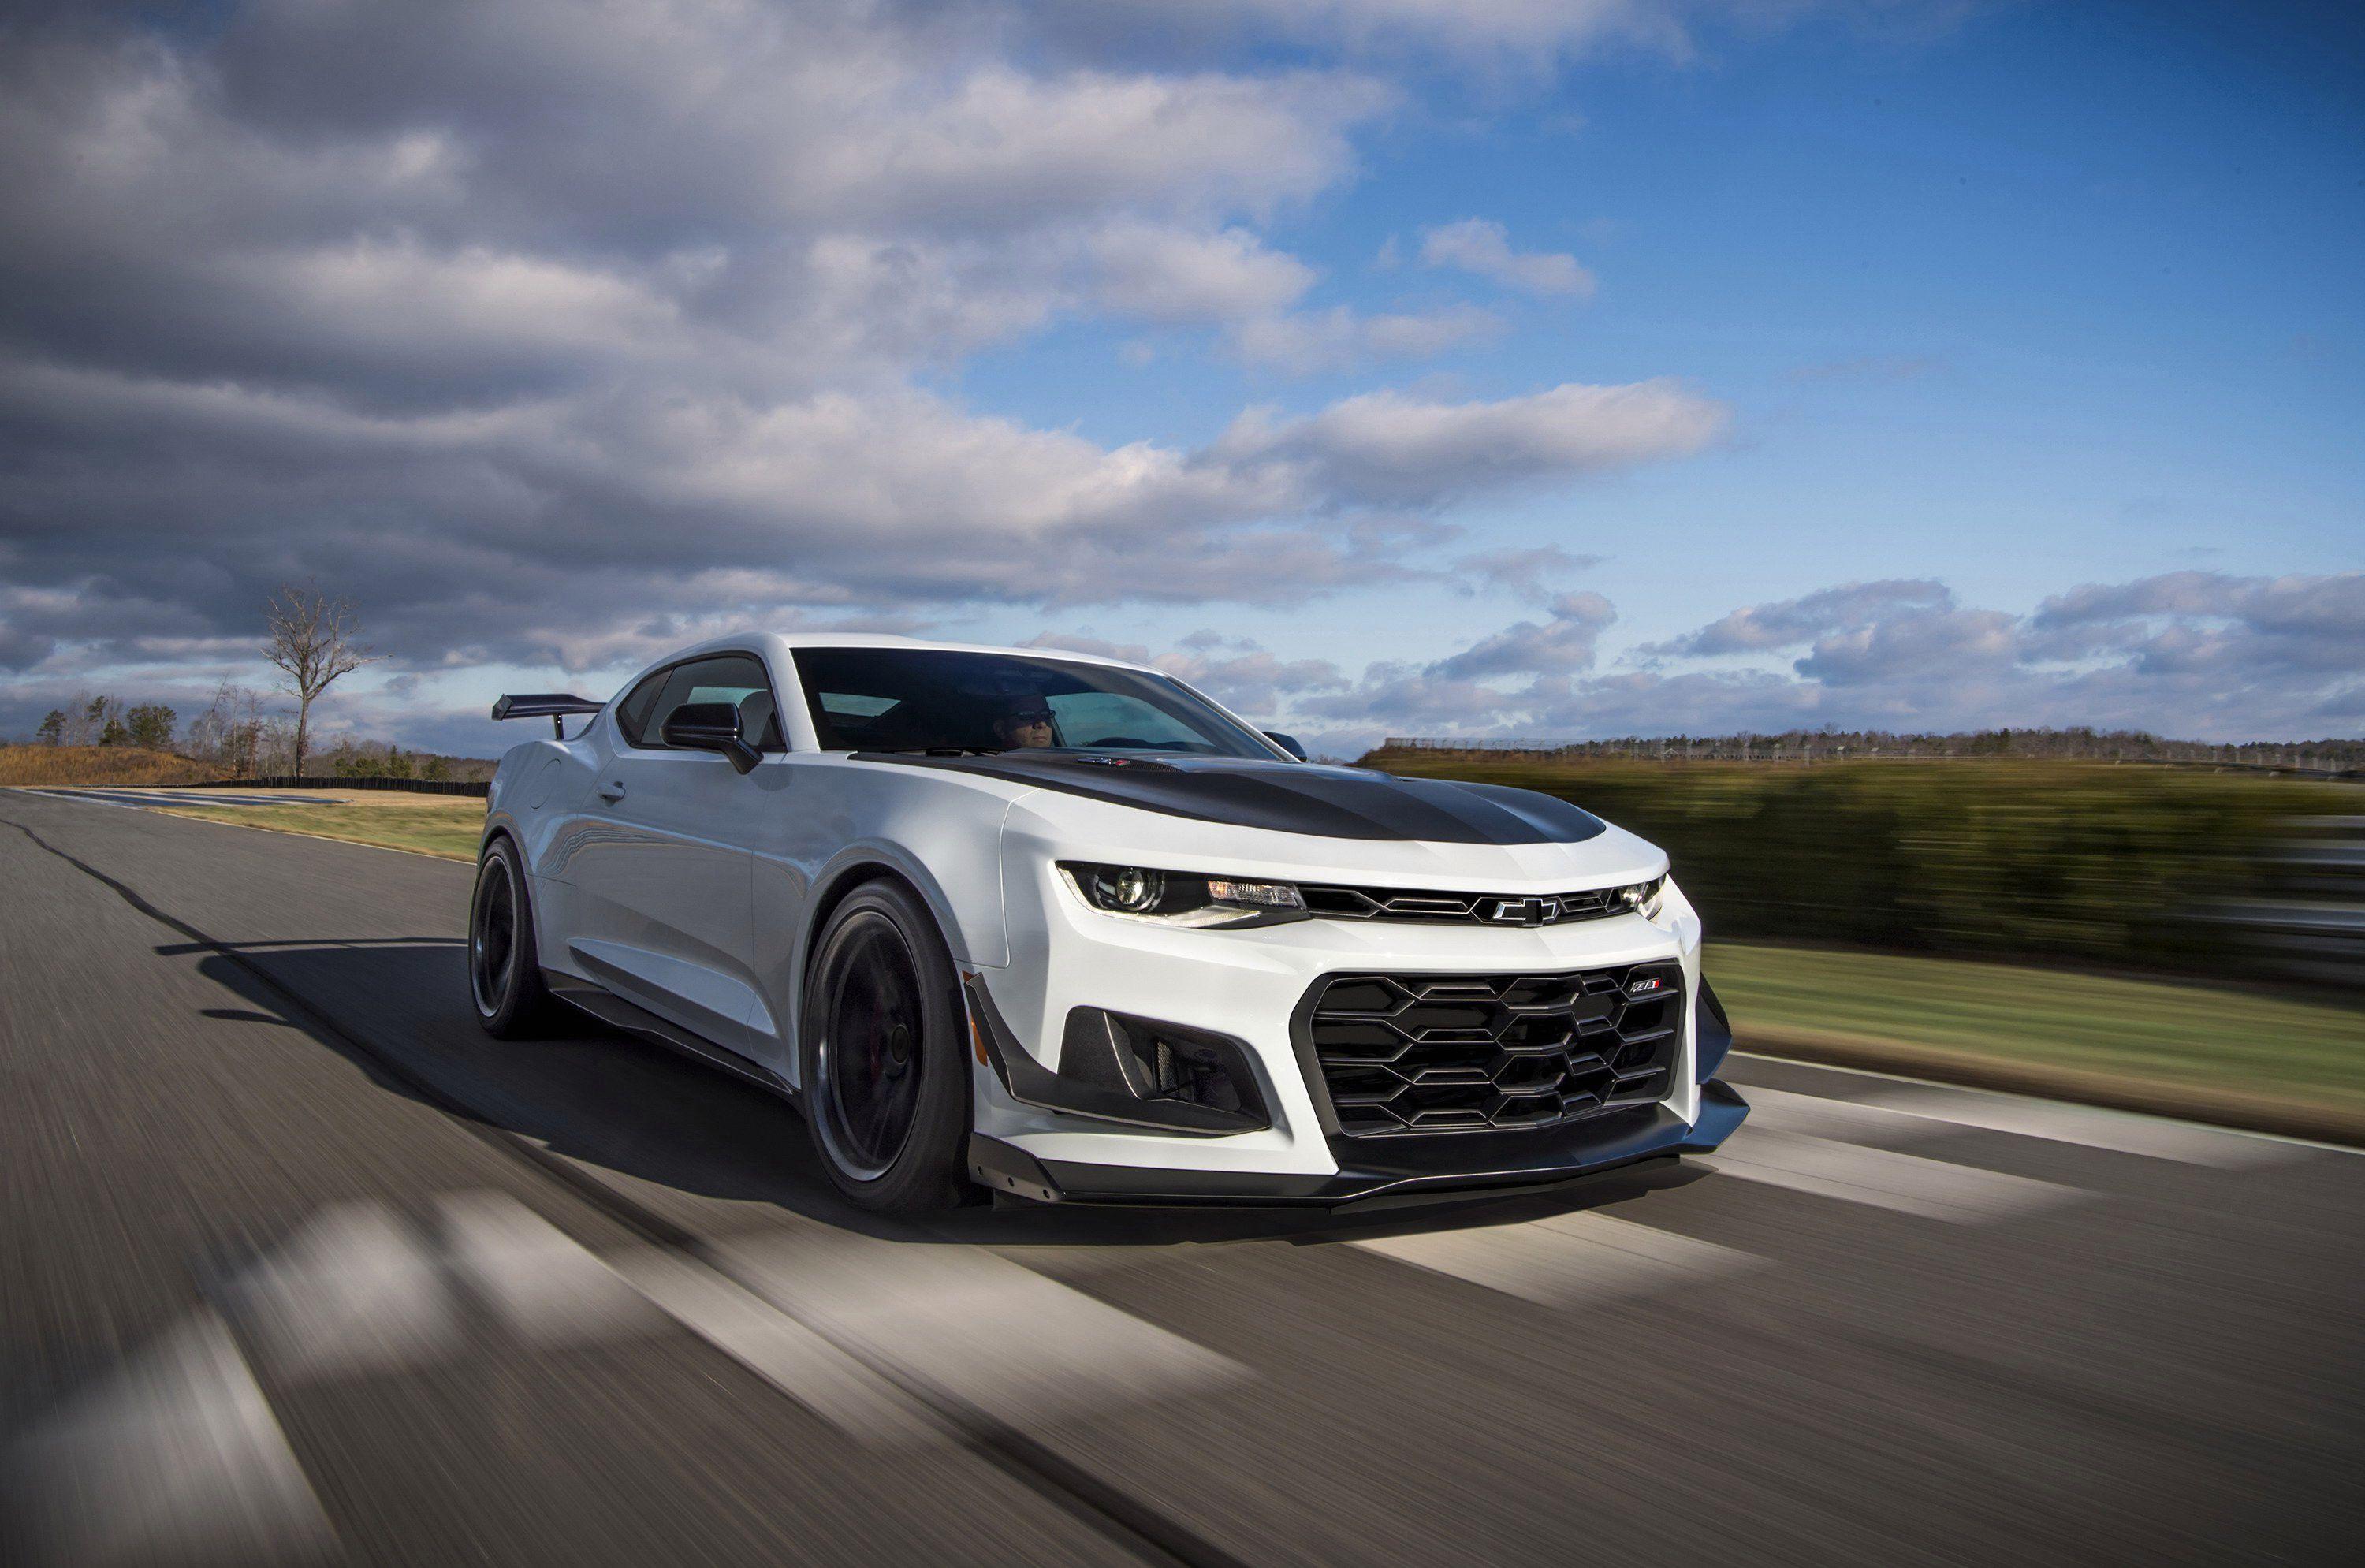 Camaro Ss Release Date Awesome 2018 Chevrolet Camaro Zl1 1le